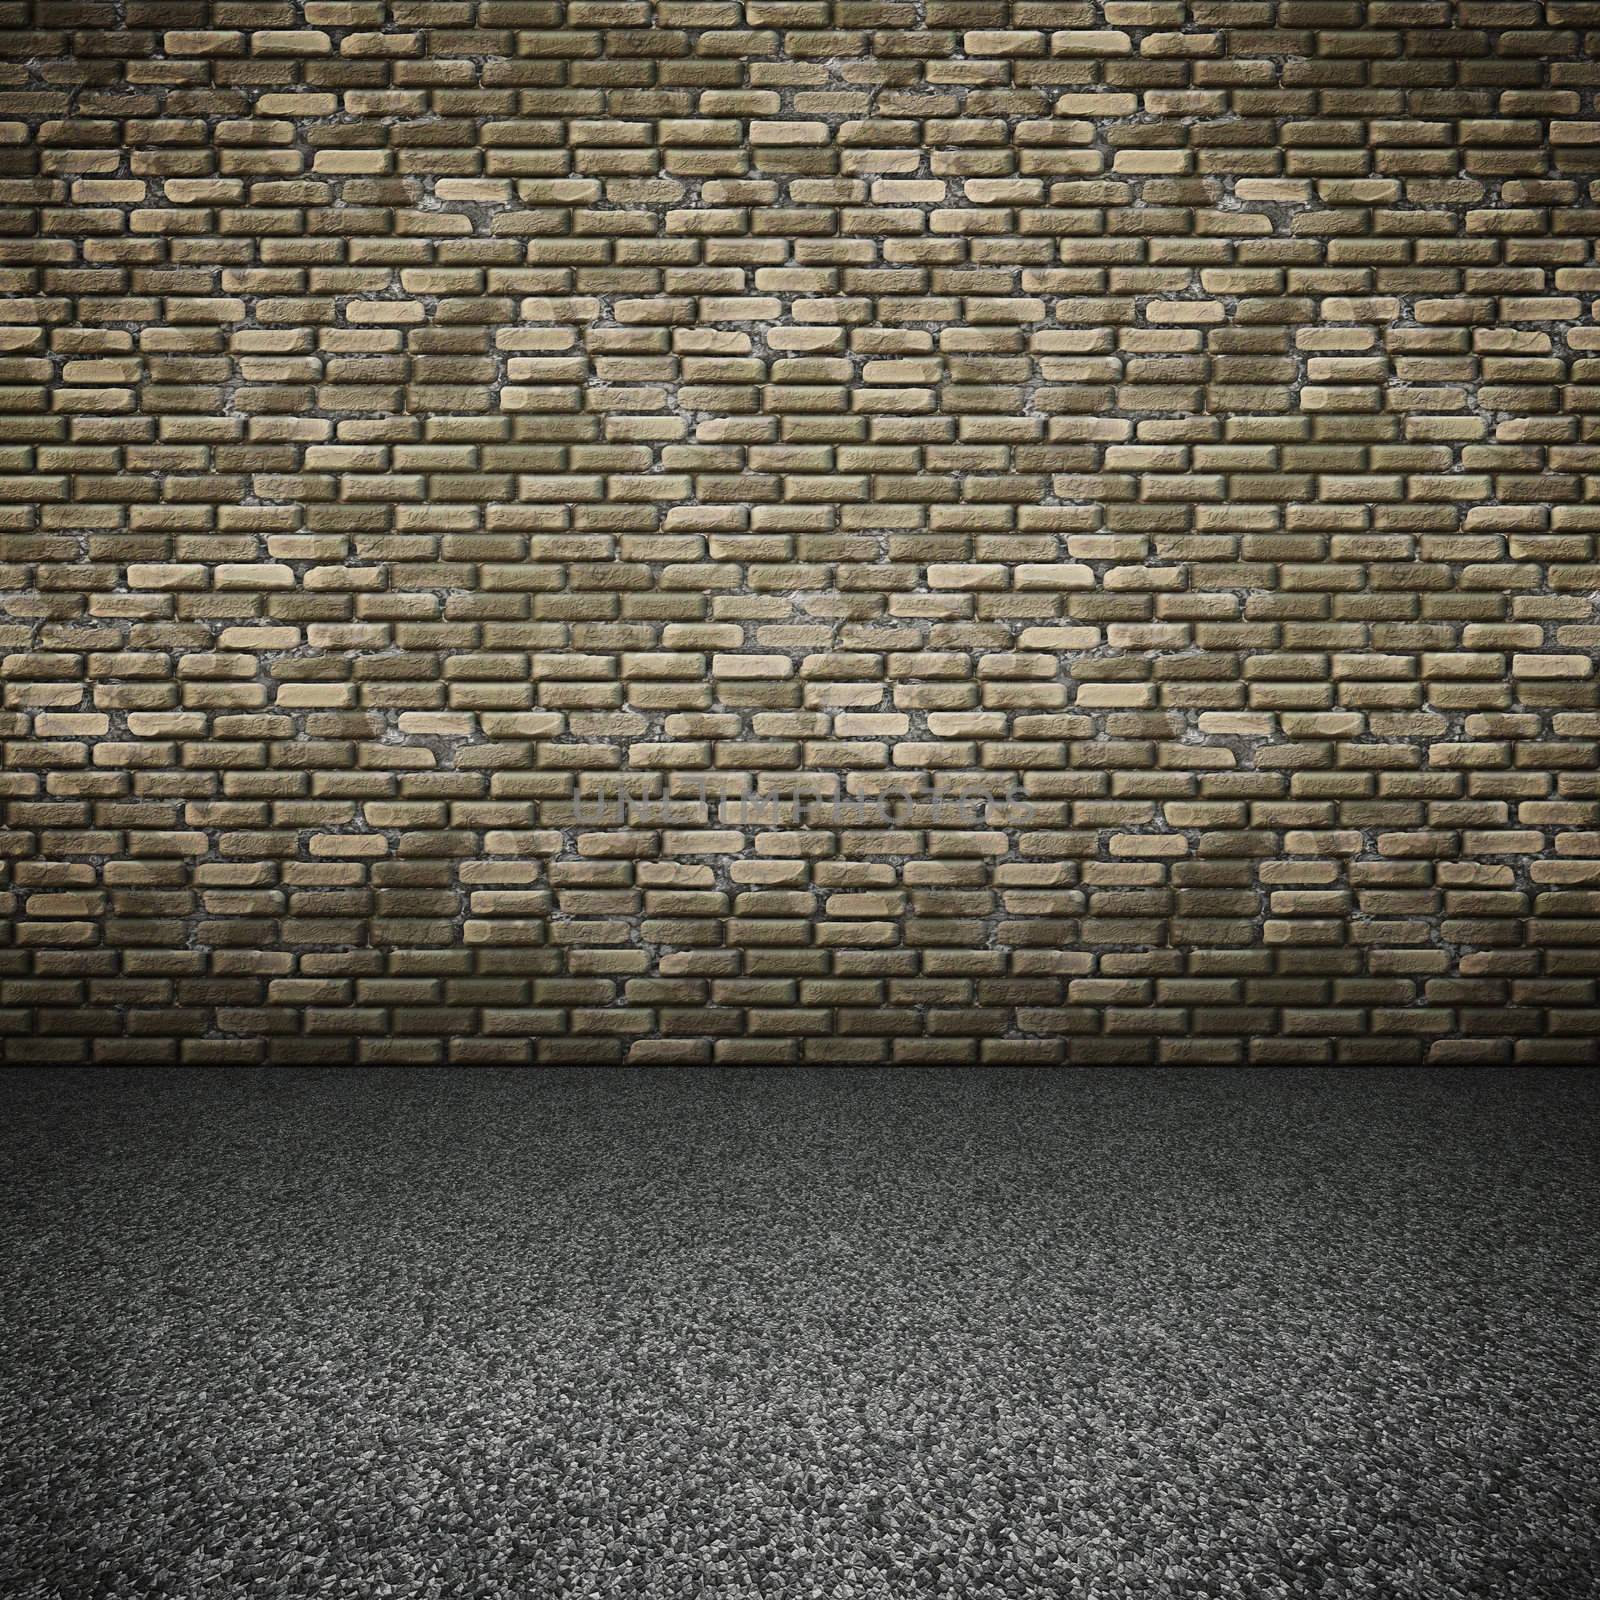 An image of a nice brick wall background